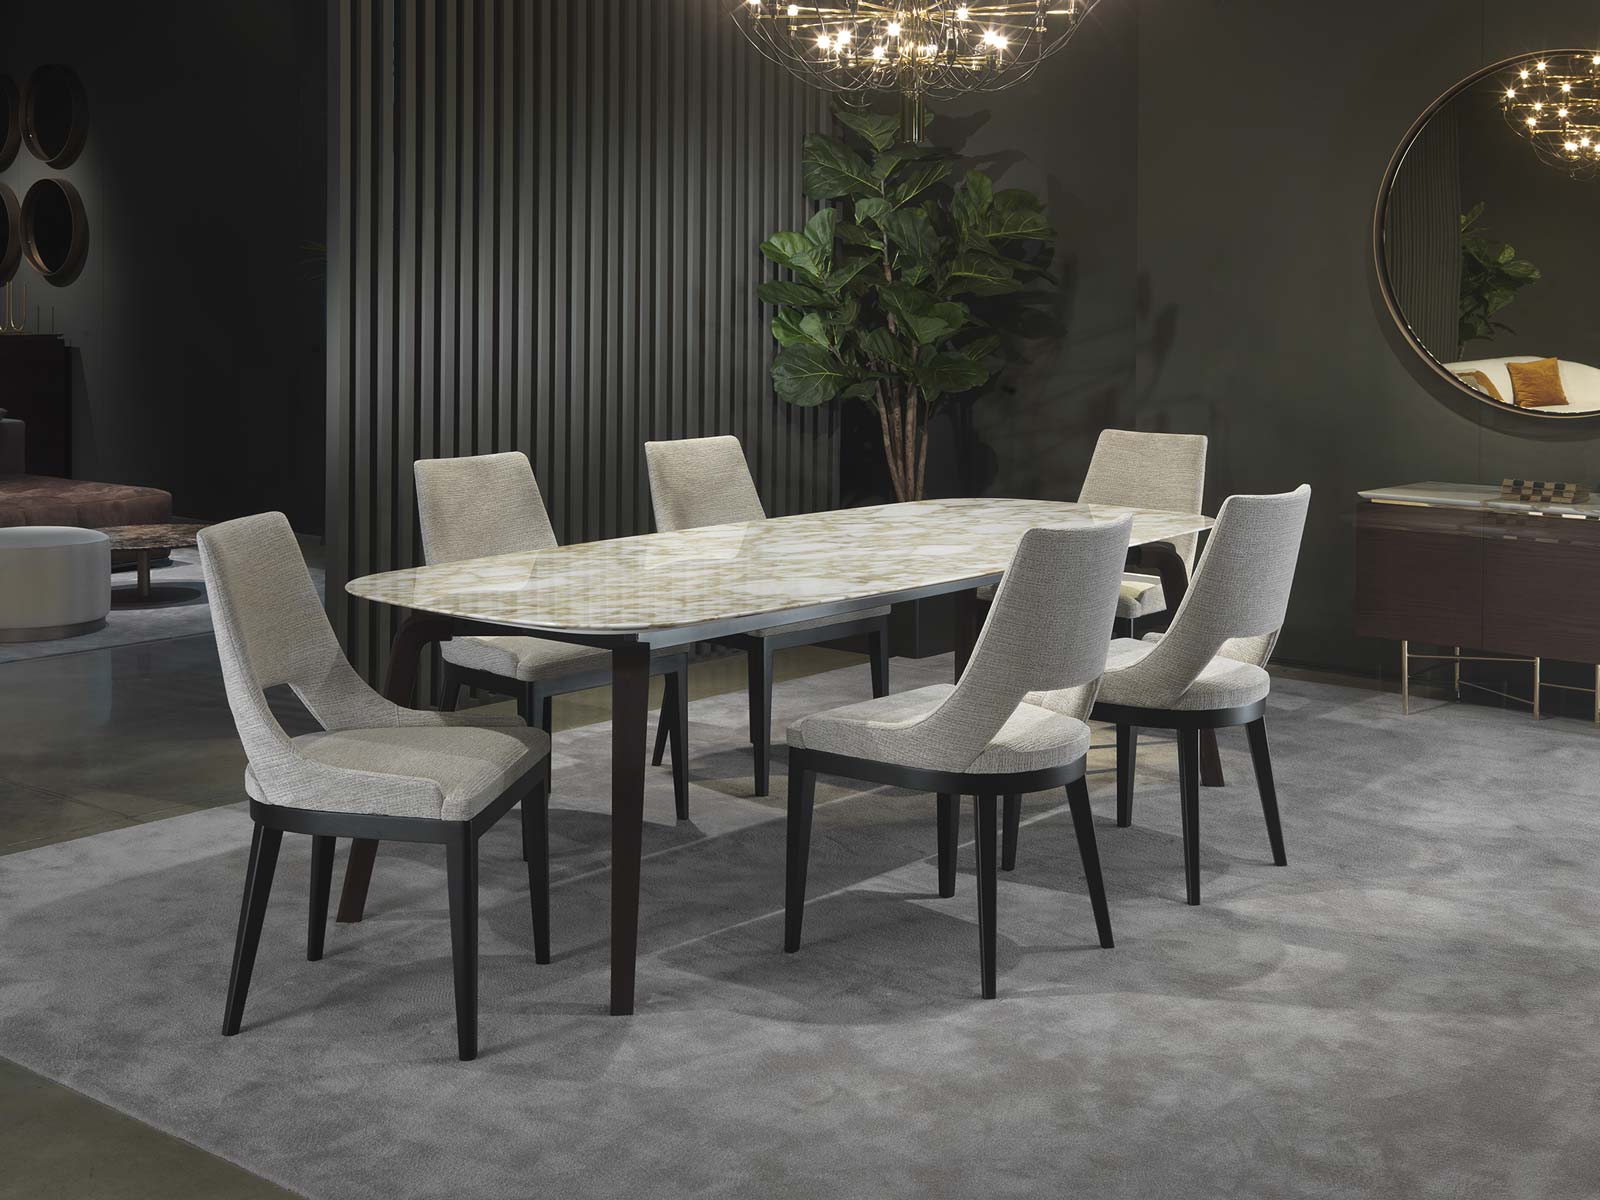 Dining chairs rubelli wooden base Grace